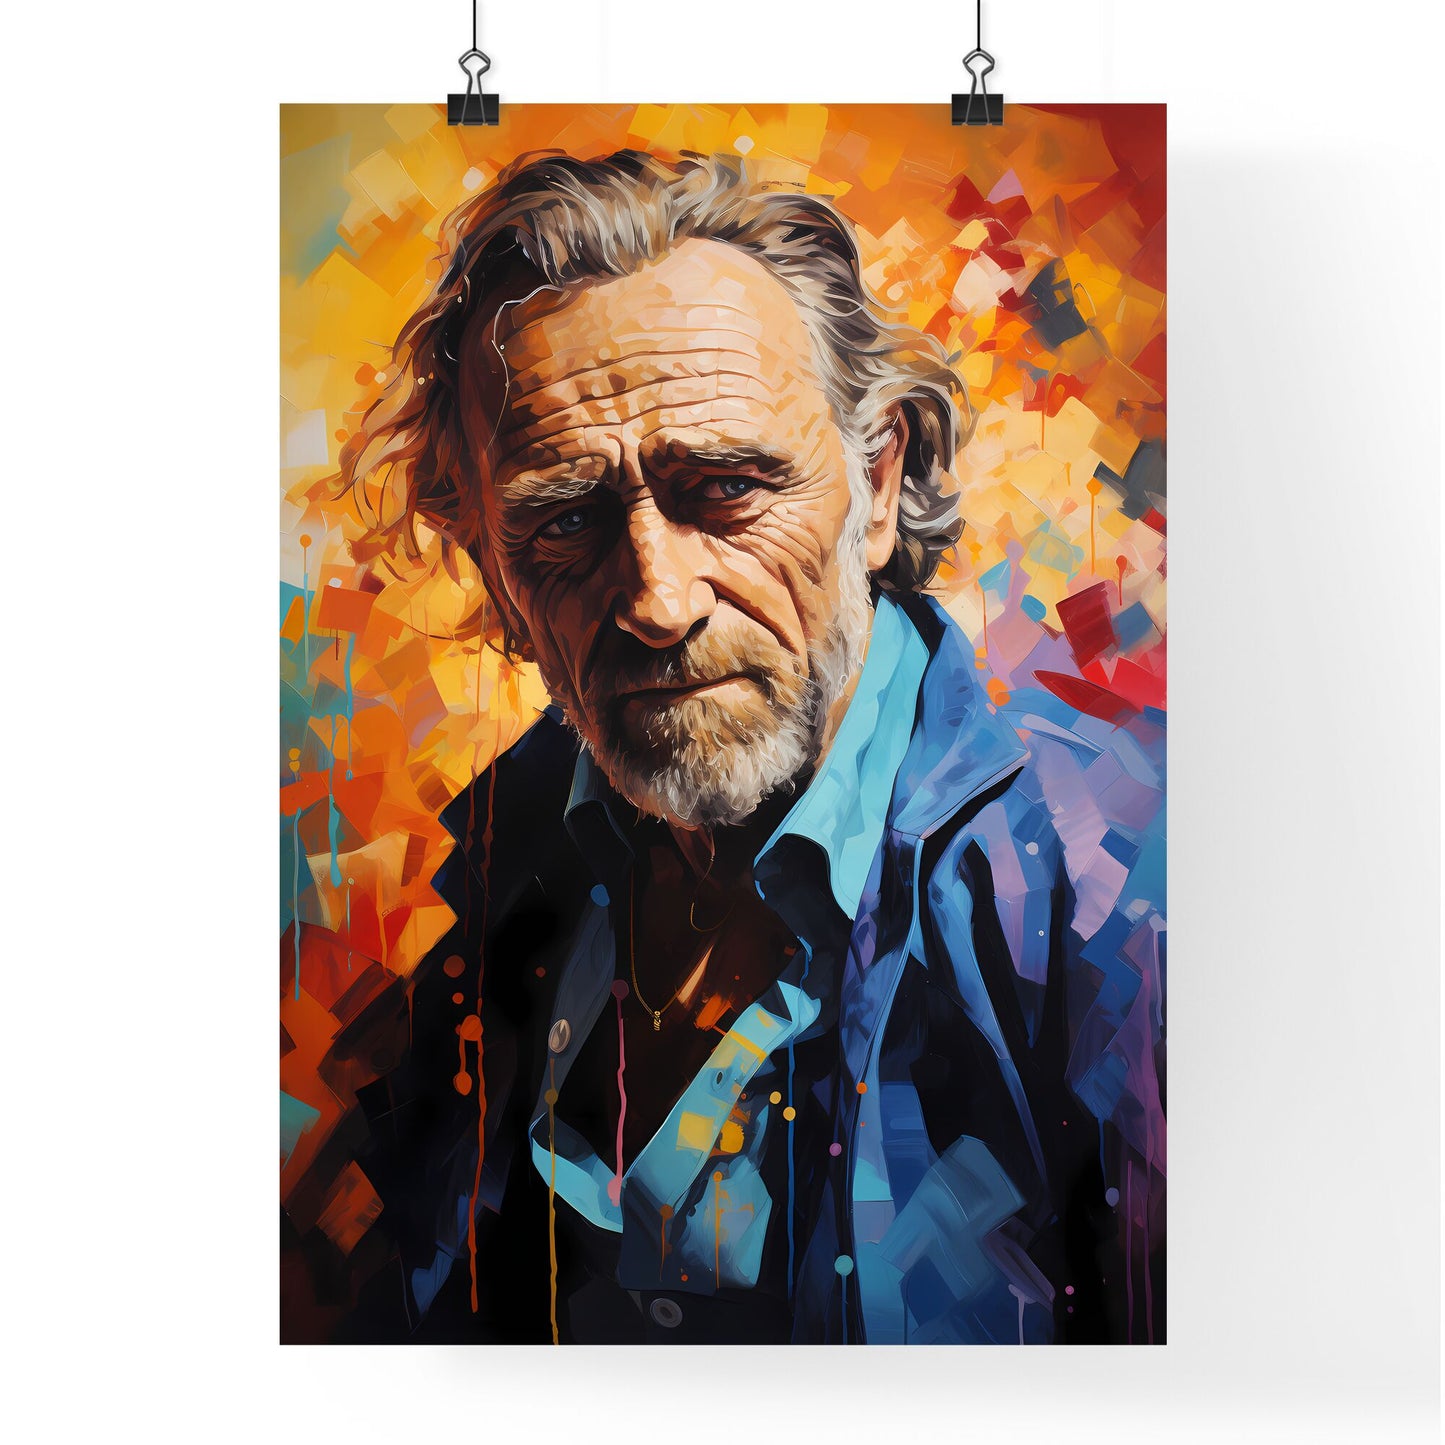 Charles Bukowski - A Painting Of A Man Default Title